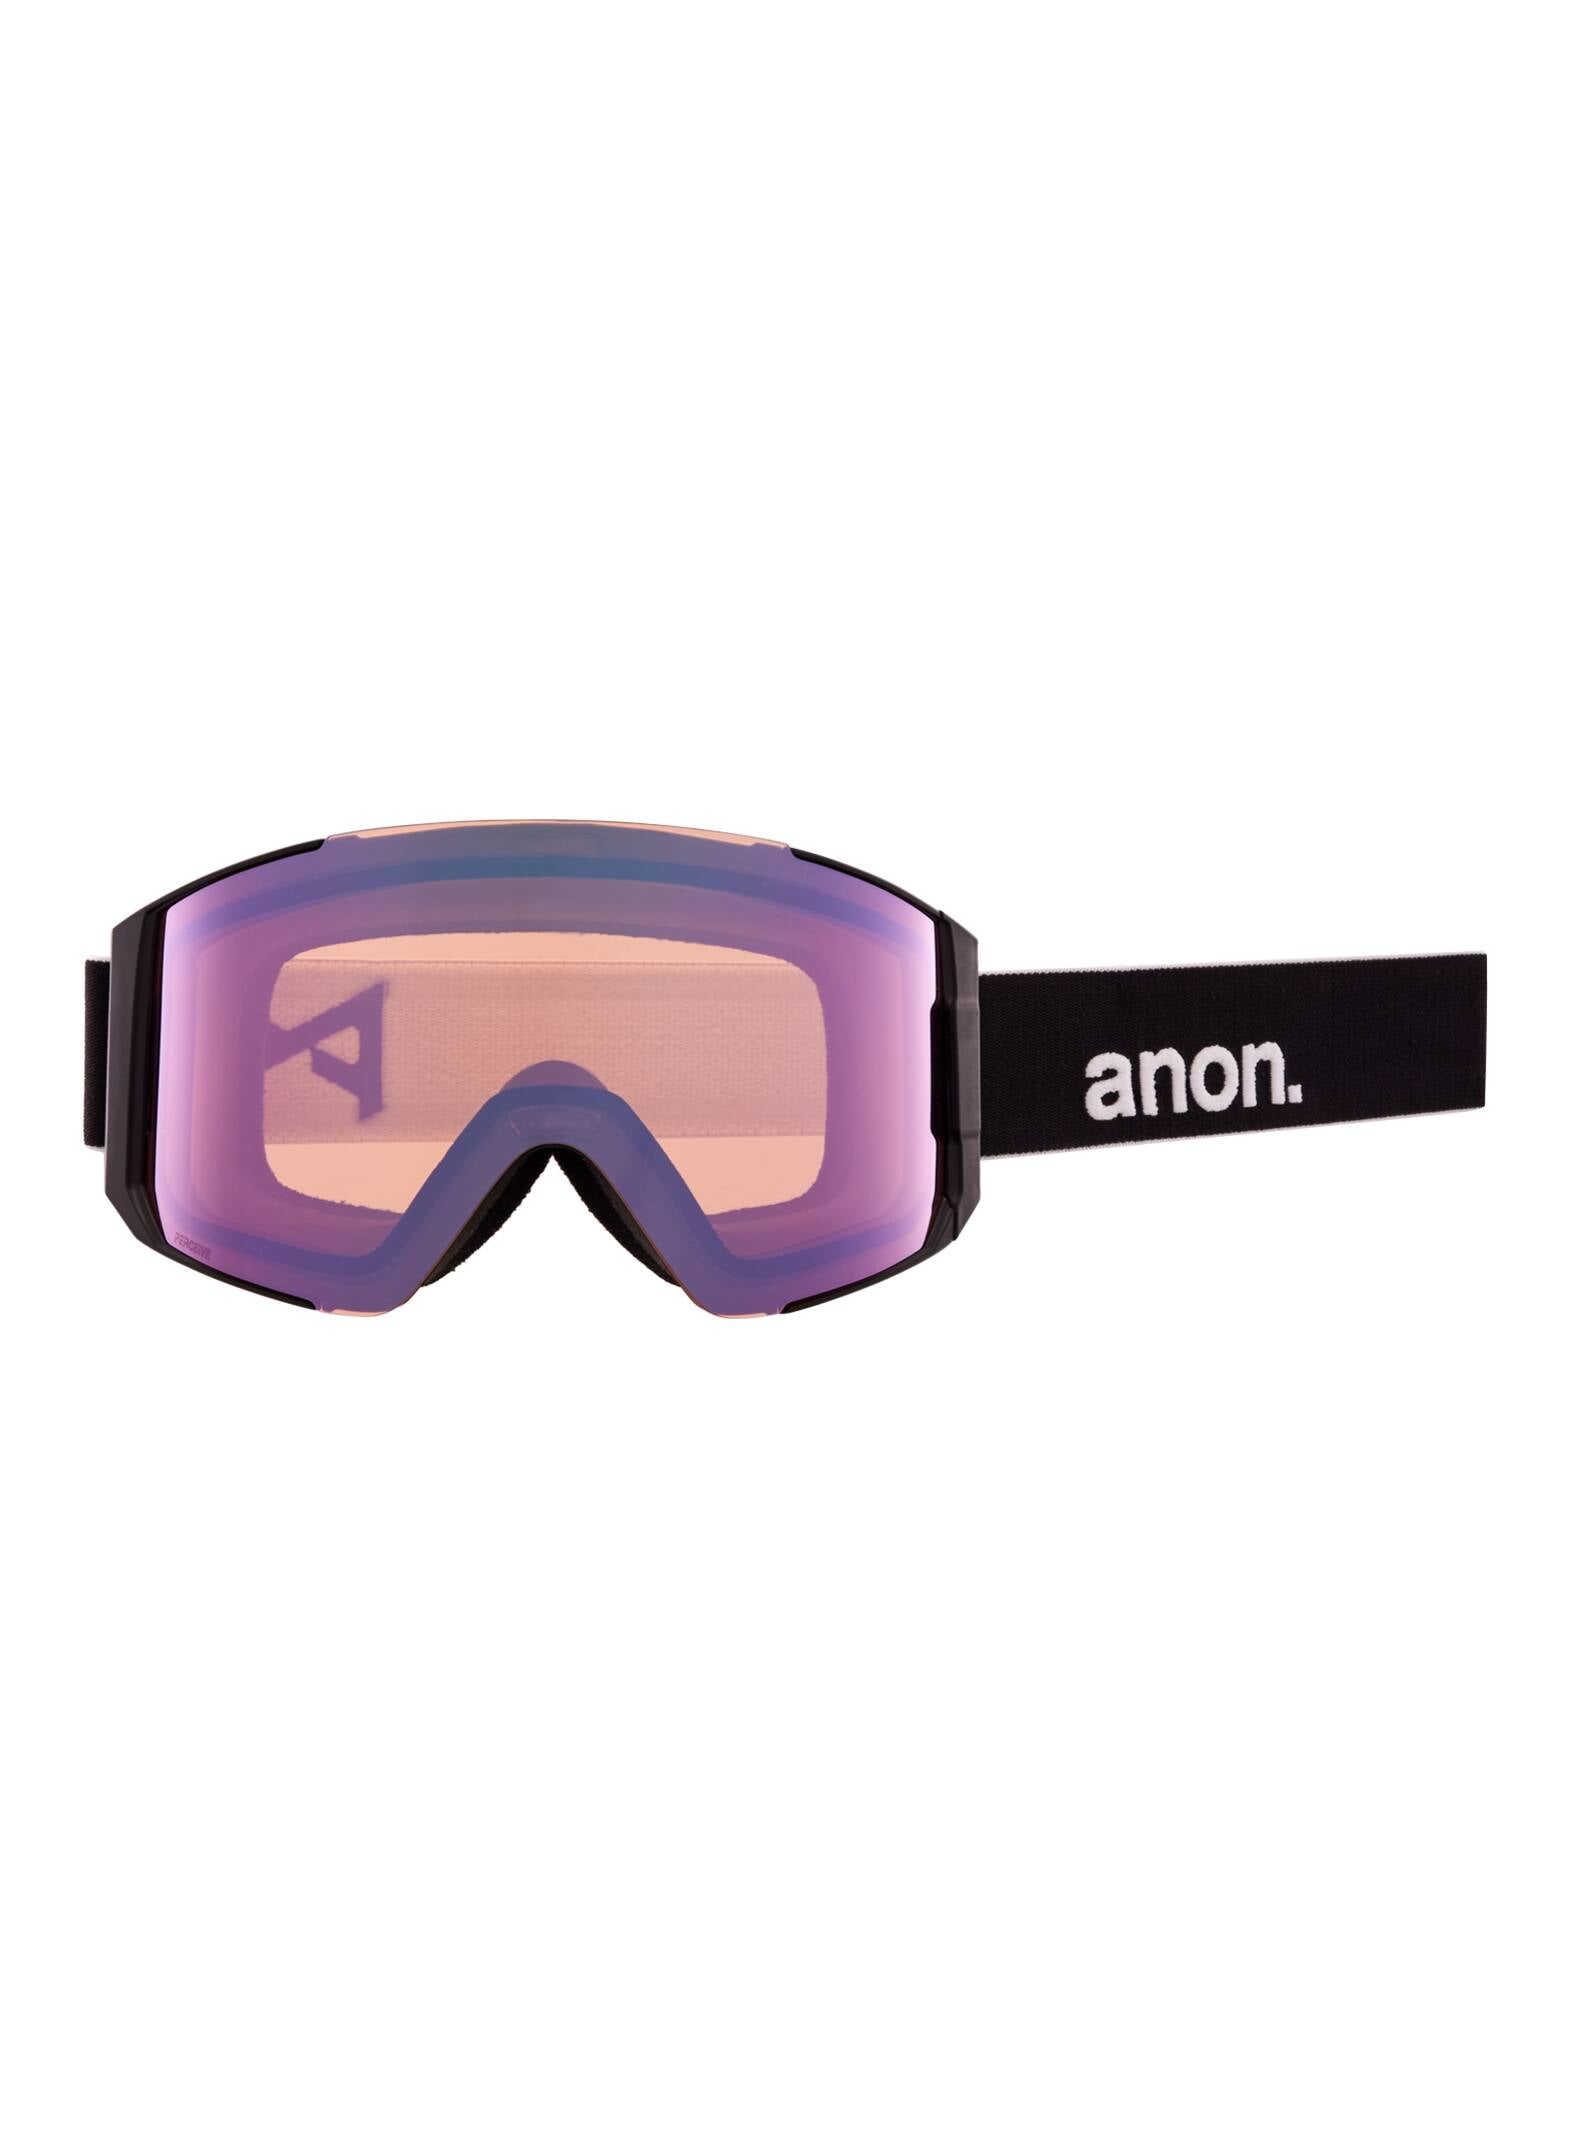 Anon Anon Sync Goggles + Bonus Lens Frame: black, lens: perceive variable green (22% / s2), spare lens: perceive cloudy pink (53% / s1)